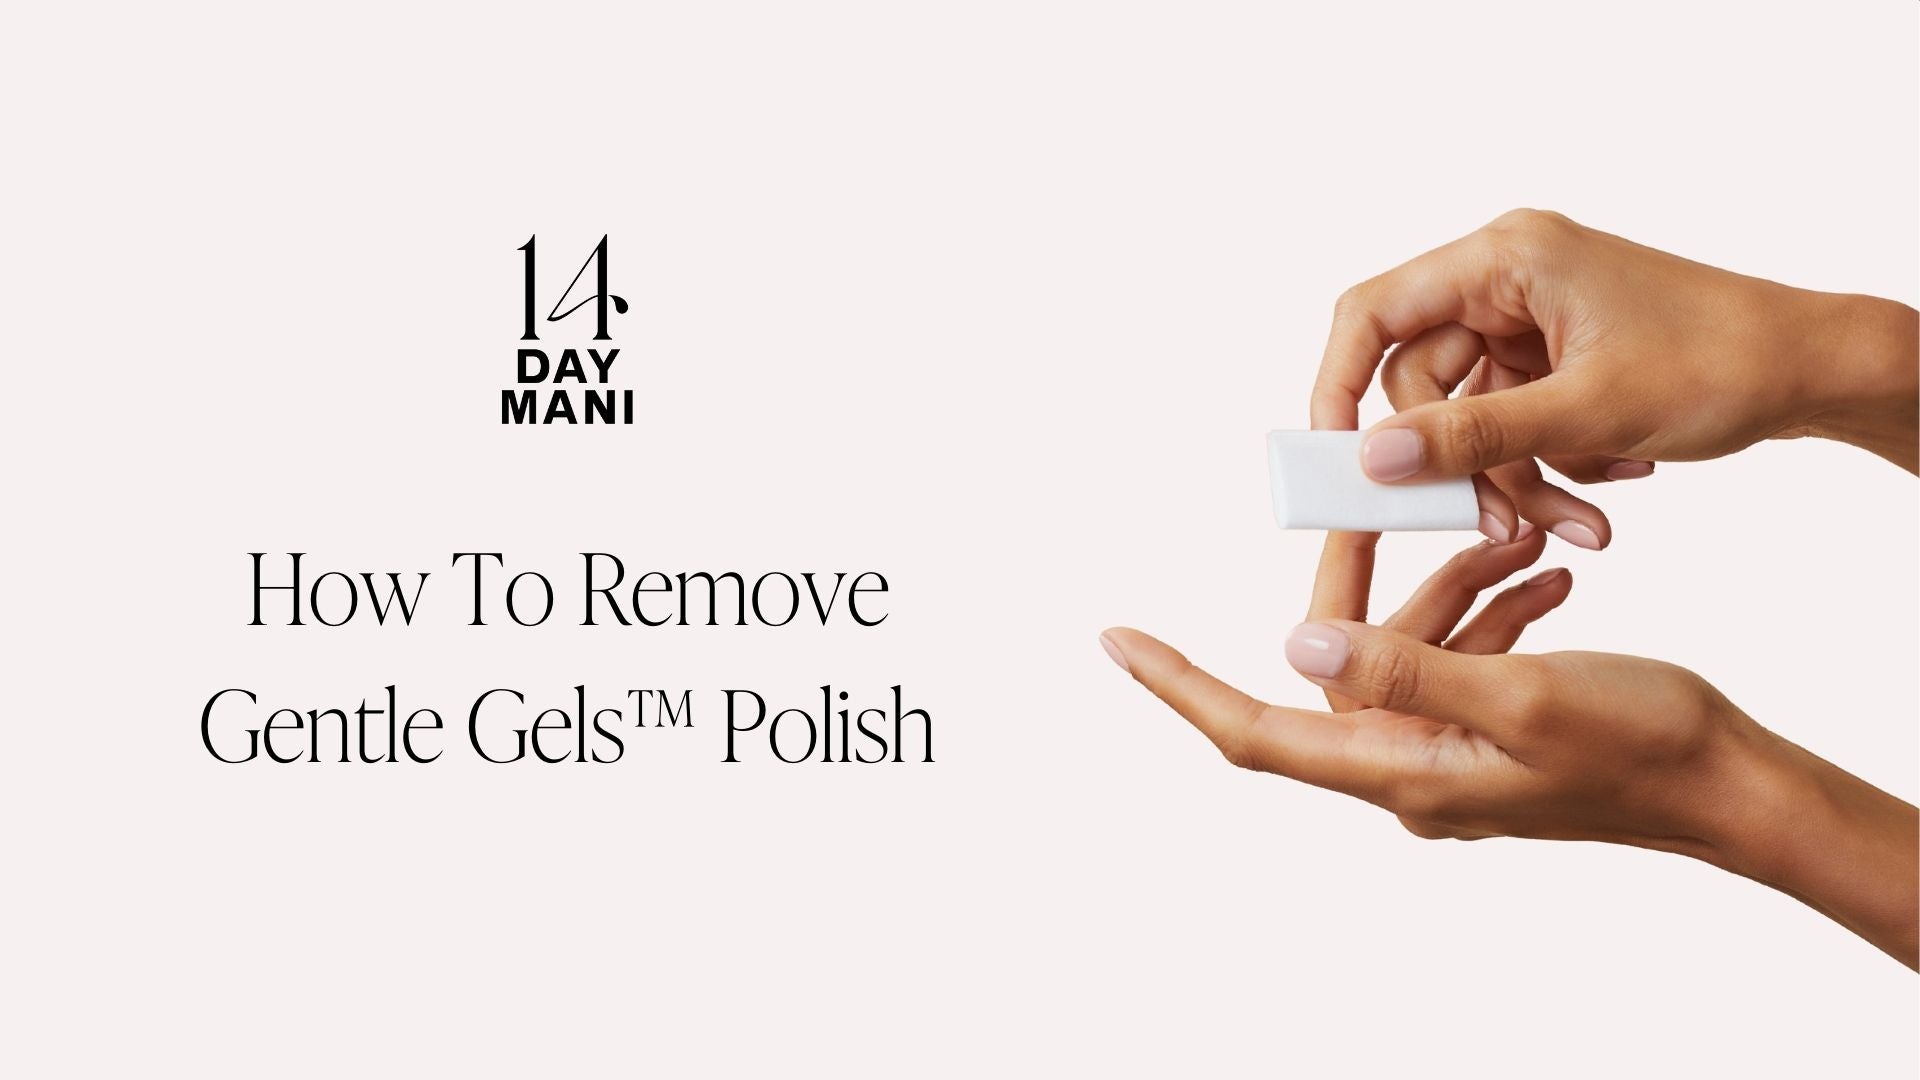 Load video: HOW TO REMOVE GENTLE GELS™ POLISH USING ACETONE